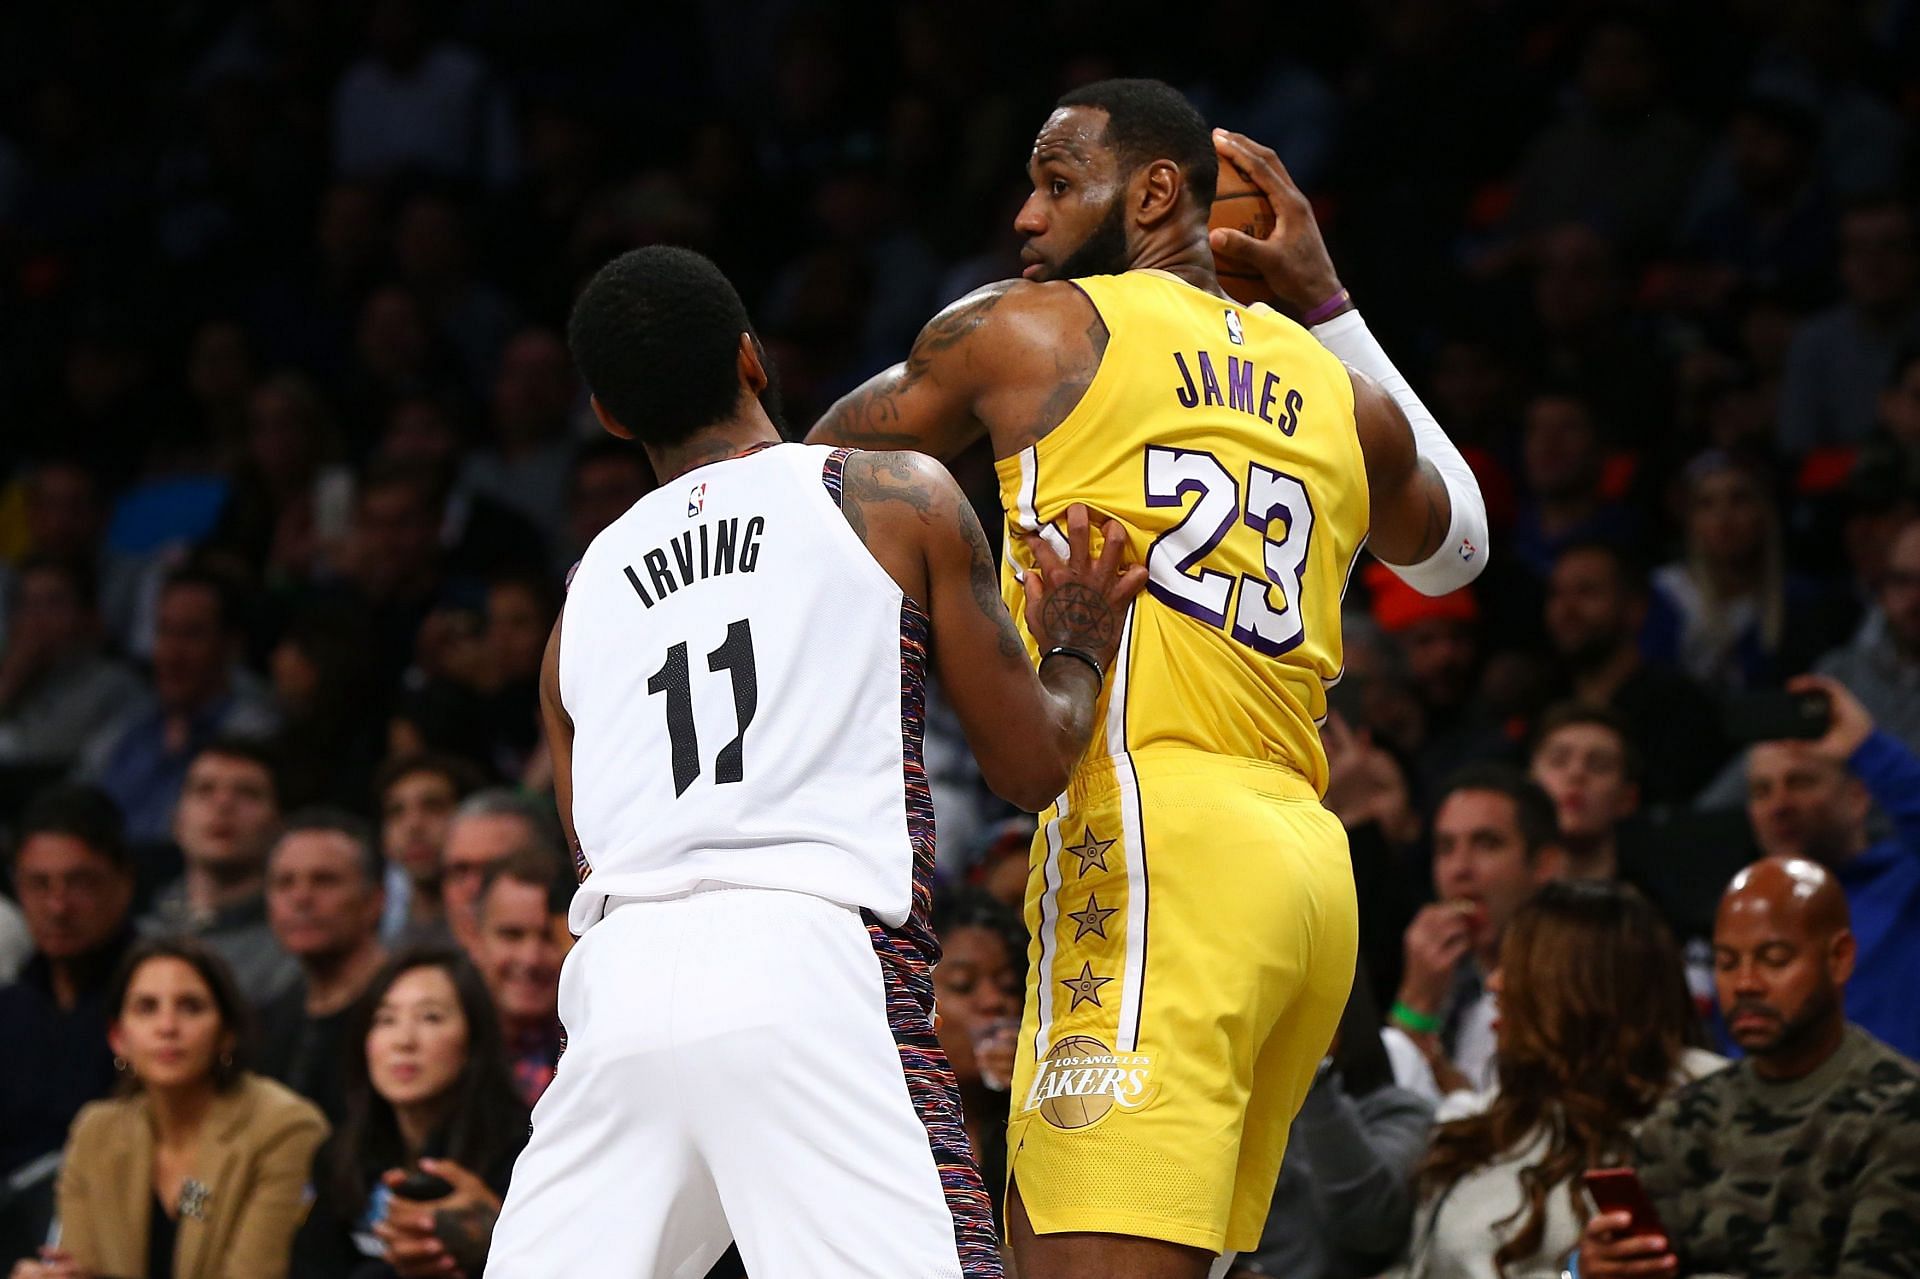 Kyrie Irving of the Brooklyn Nets and LeBron James of the LA Lakers